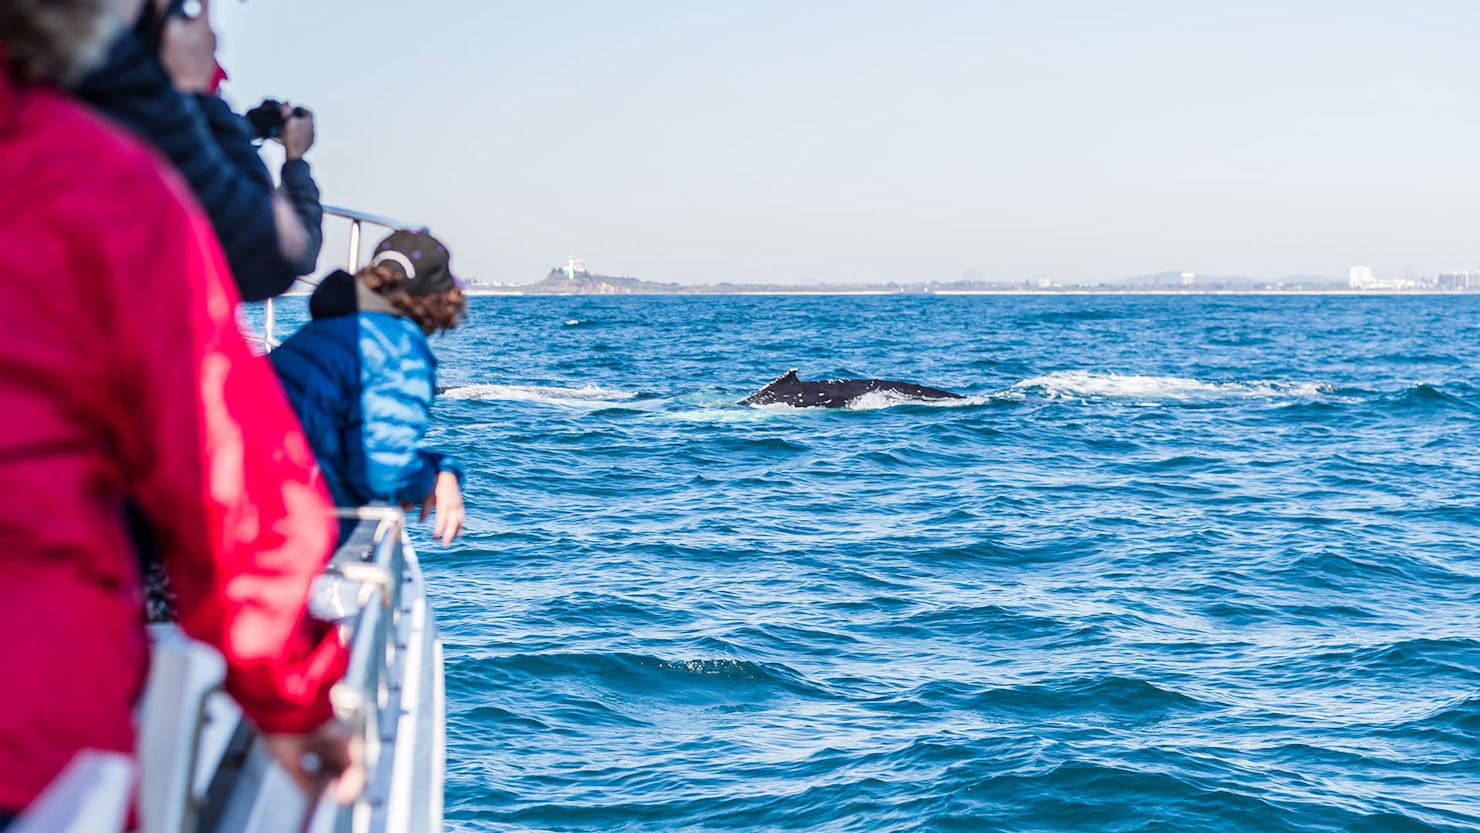 Join a tour and see the whales up close